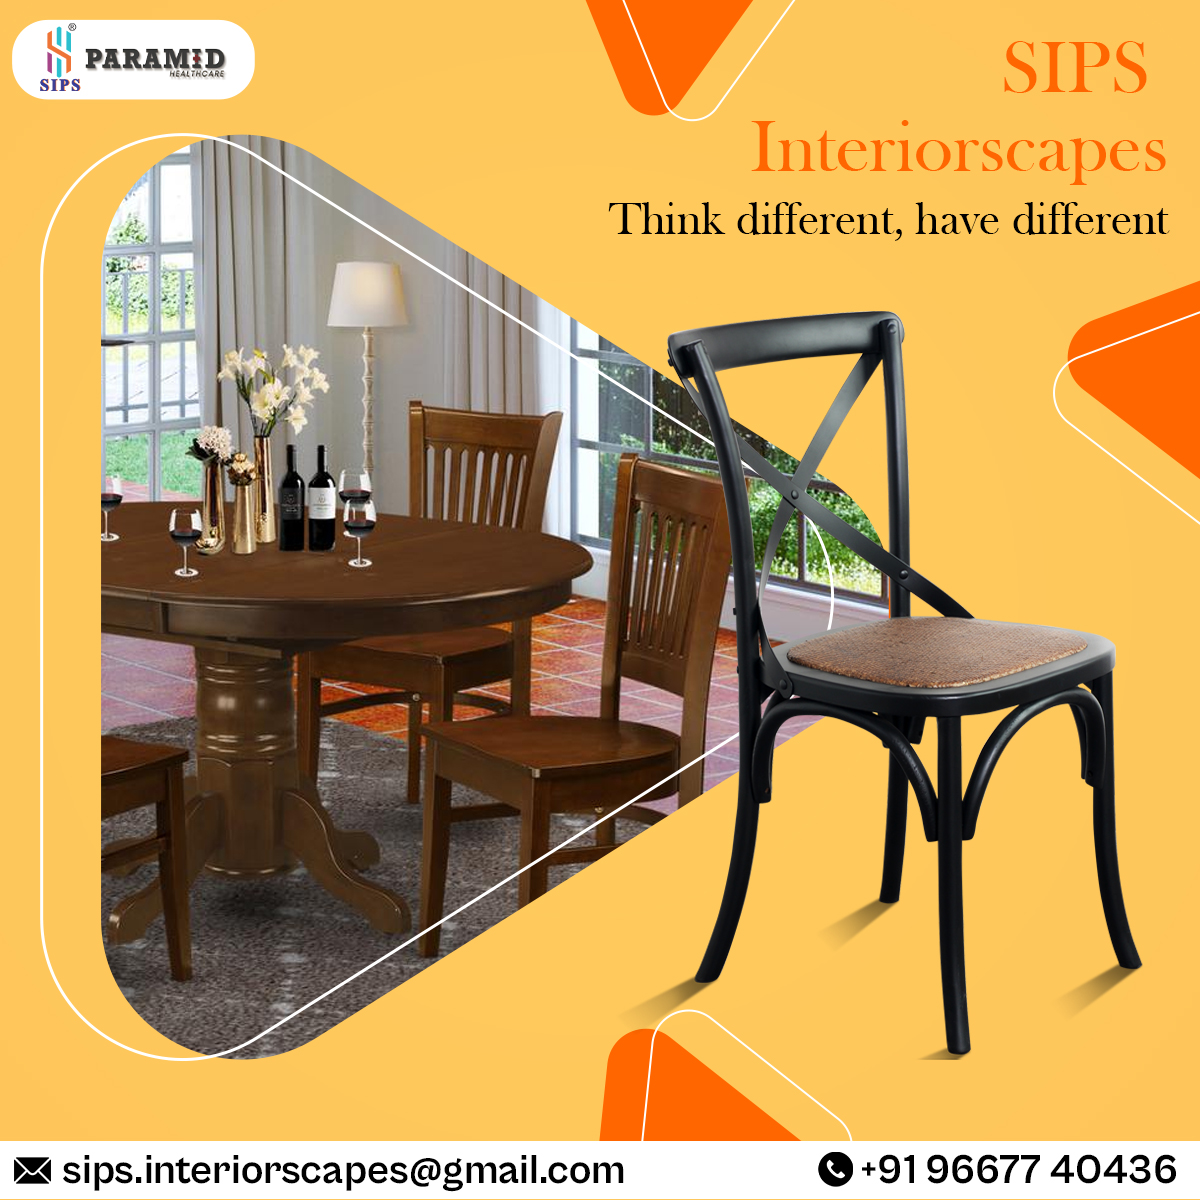 SIPS
Interiorscapes
Think different, have different
.
.
#restaurant #sips
#furniture #furnituredesign #officefurniture #furnituremanufacturer #restaurantfurniture #furnitures #furnituredesigner #handmadefurniture #industrialfurniture #interiorfurniture #modernfurnituredesign